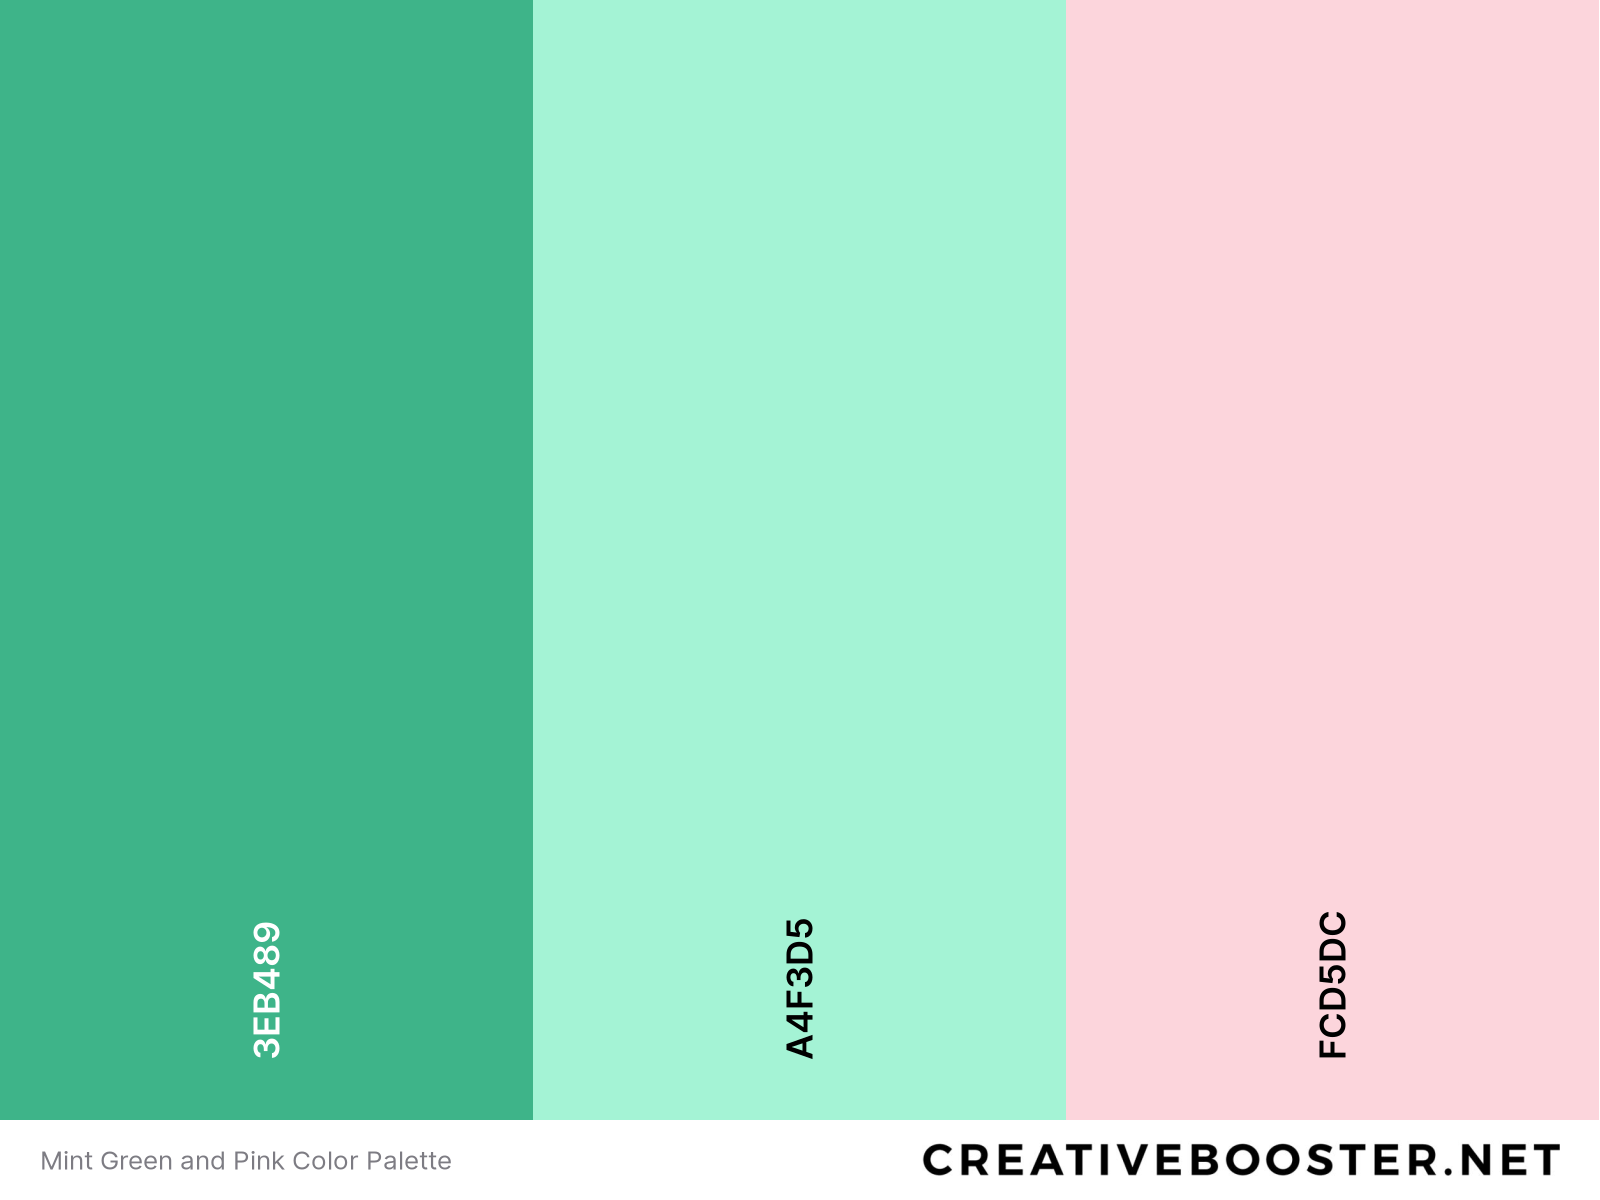 Mint Green and Pink Color Palette